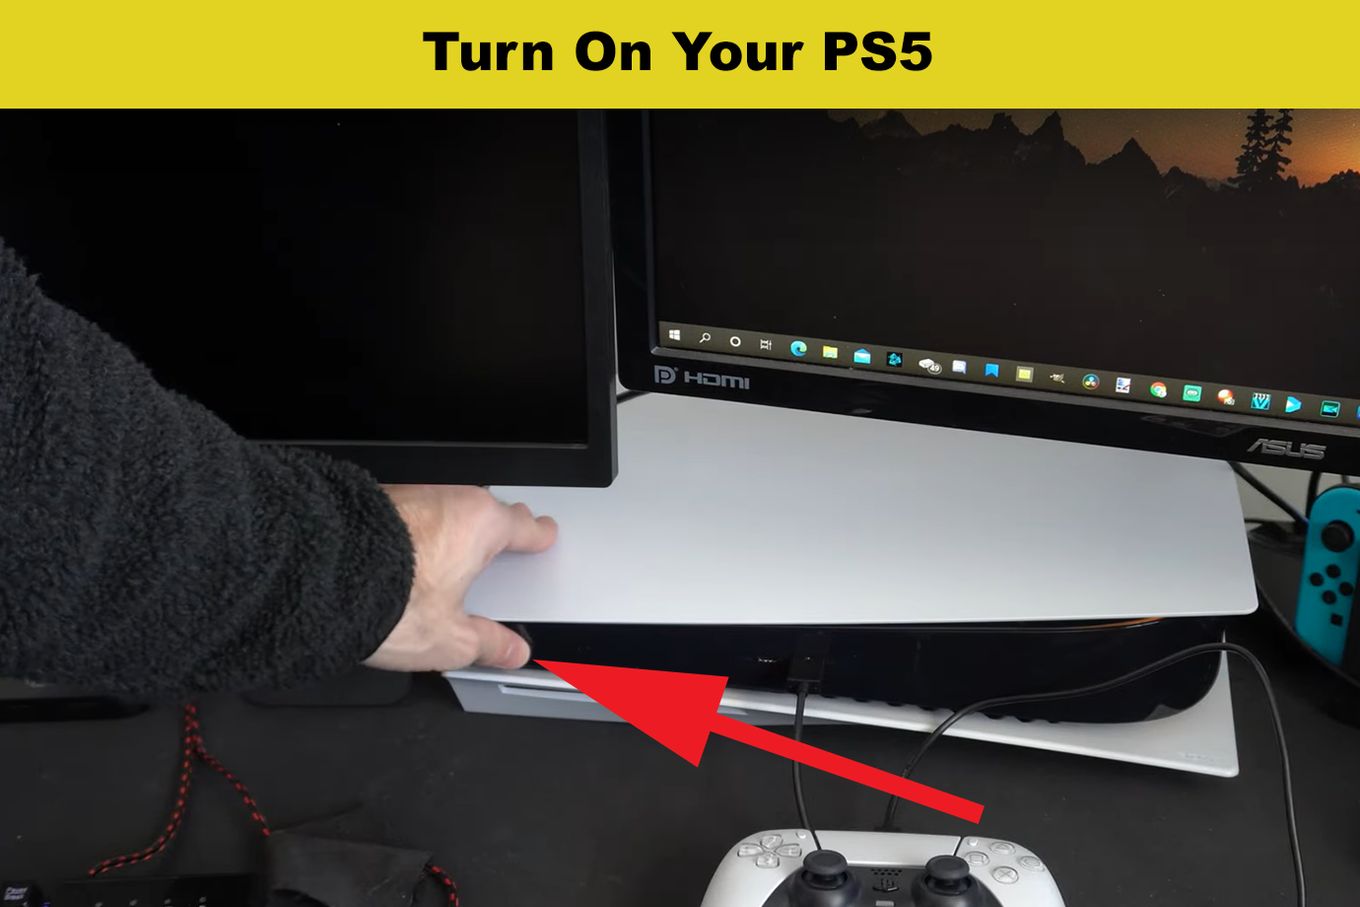 Turn on the PS5 console